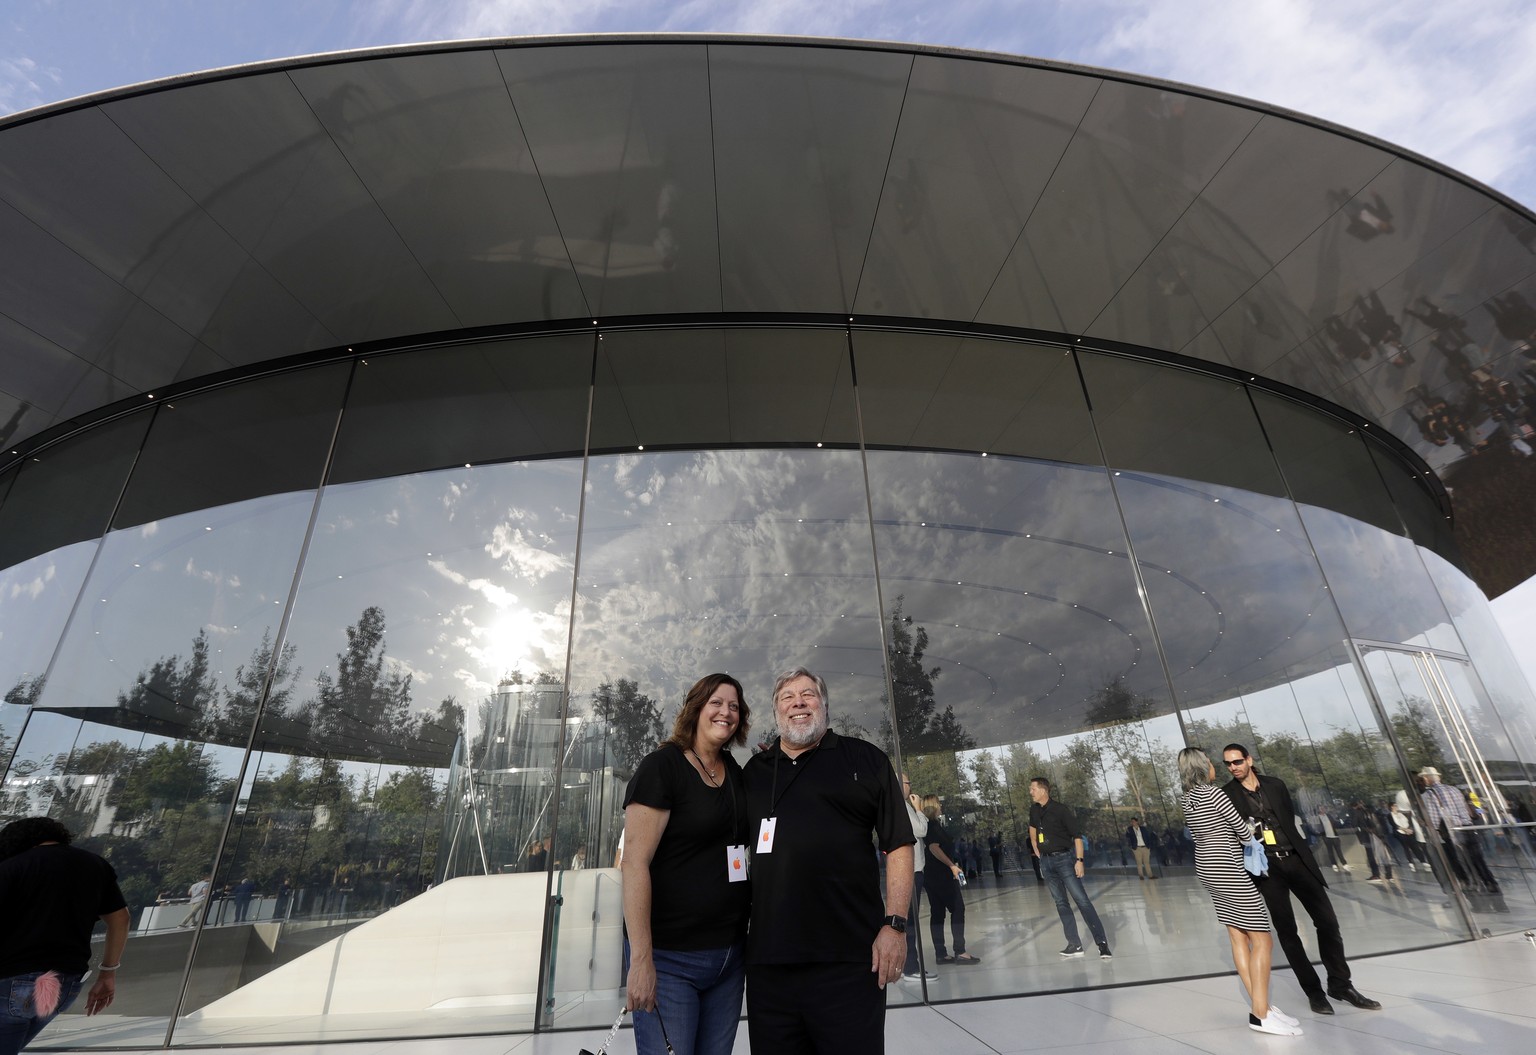 Apple co-founder Steve Wozniak and his wife, Janet Wozniak, arrive for a new product announcement at the Steve Jobs Theater on the new Apple campus, Tuesday, Sept. 12, 2017, in Cupertino, Calif. (AP P ...